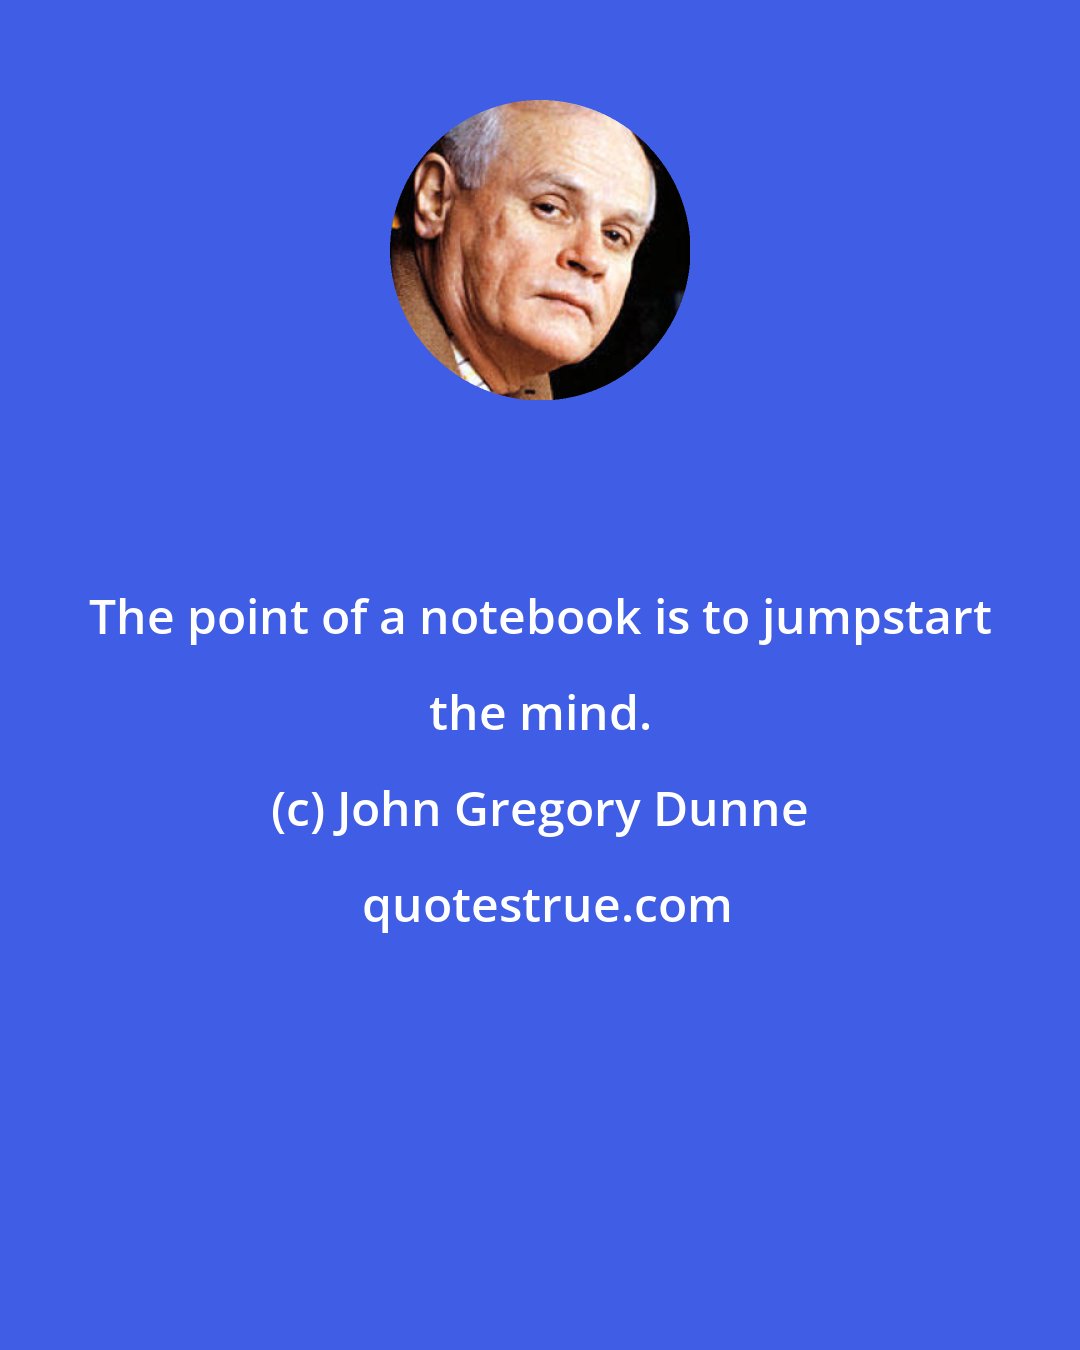 John Gregory Dunne: The point of a notebook is to jumpstart the mind.